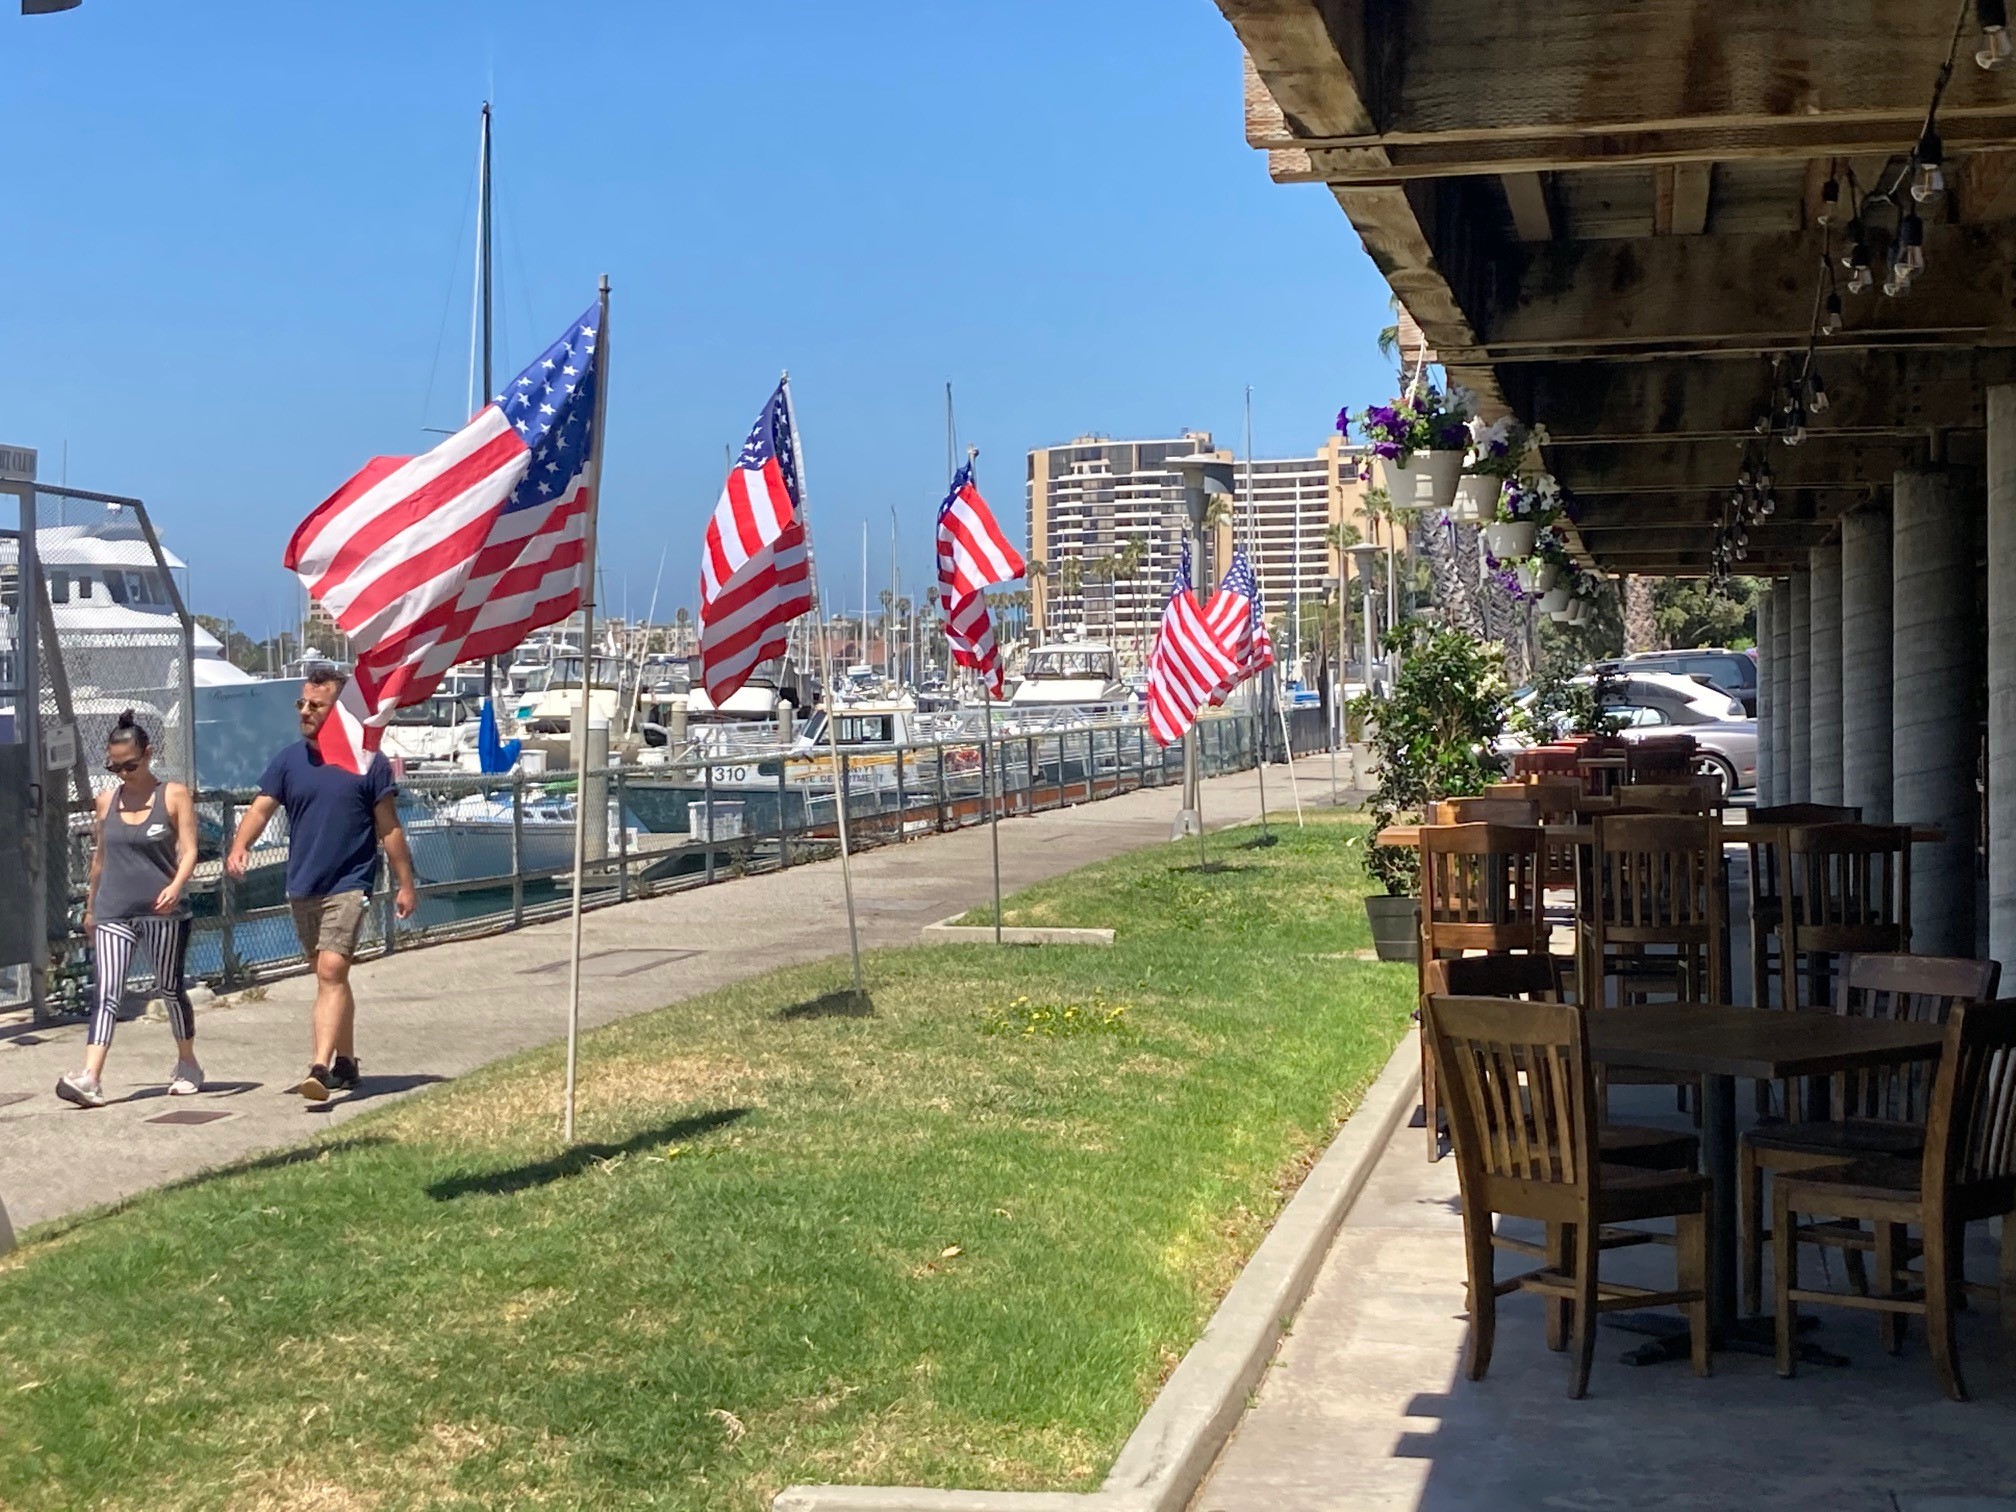 Grass with flags posted along harborfront walk and outdoor restaurant patio seating